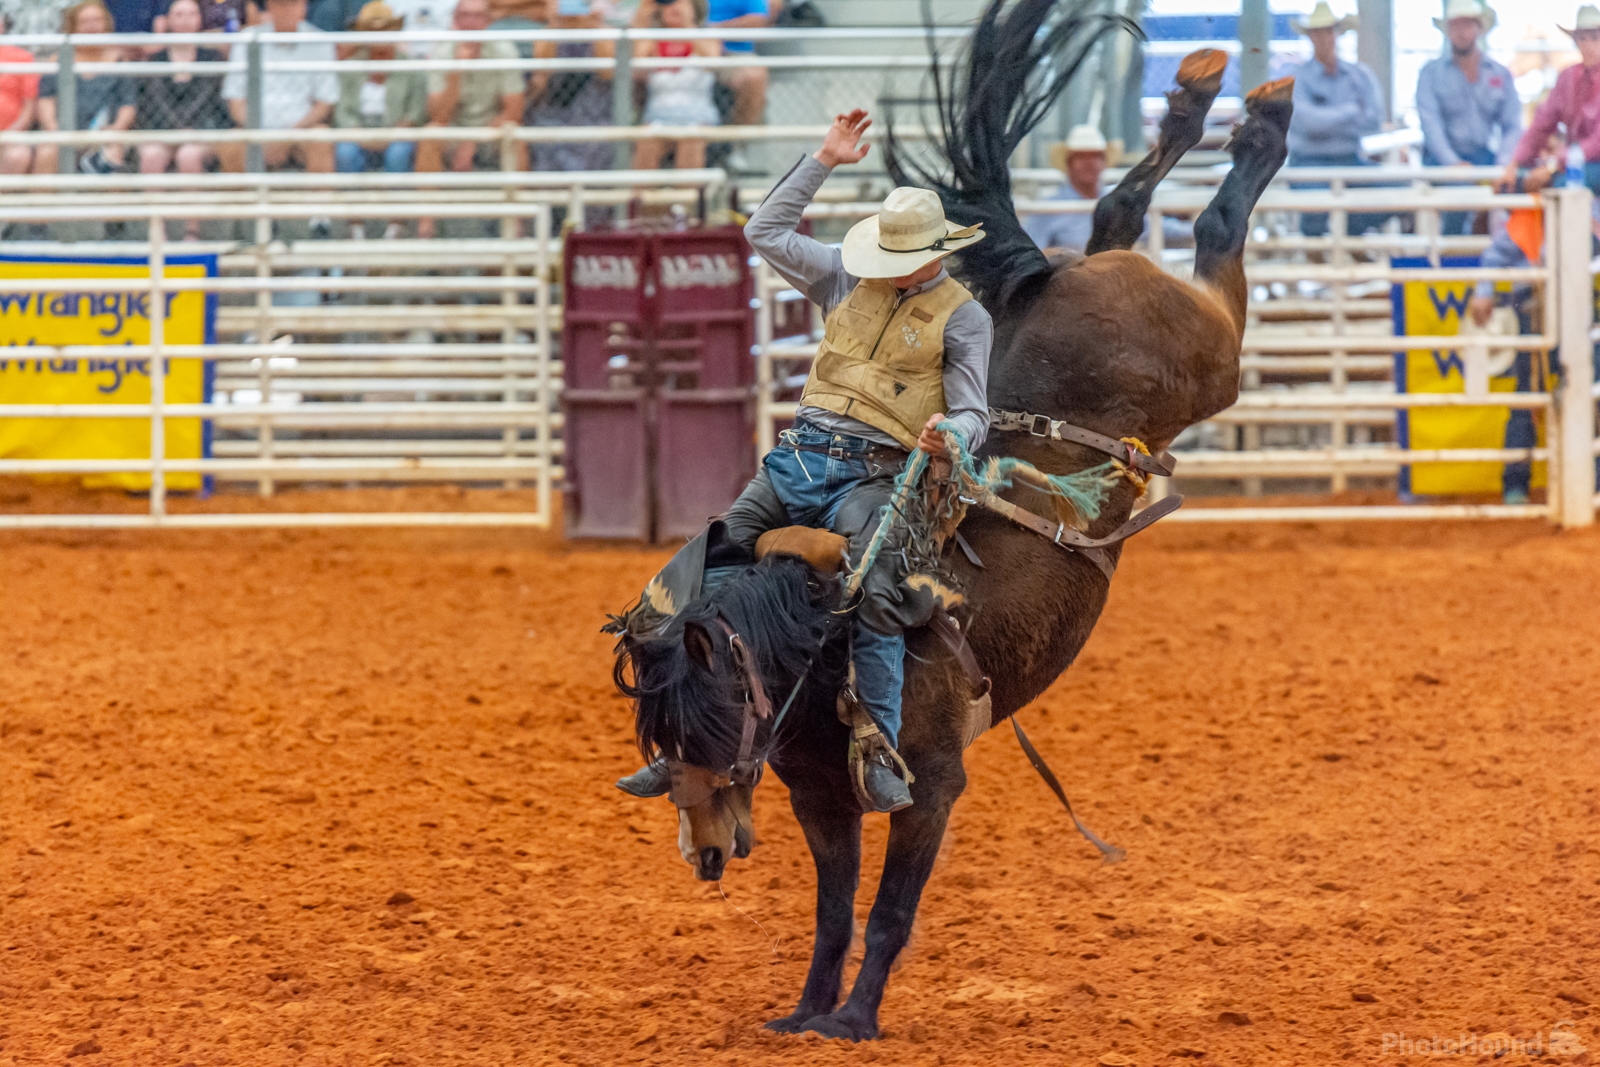 Image of Arcadia All-Florida Championship Rodeo by Wayne Foote